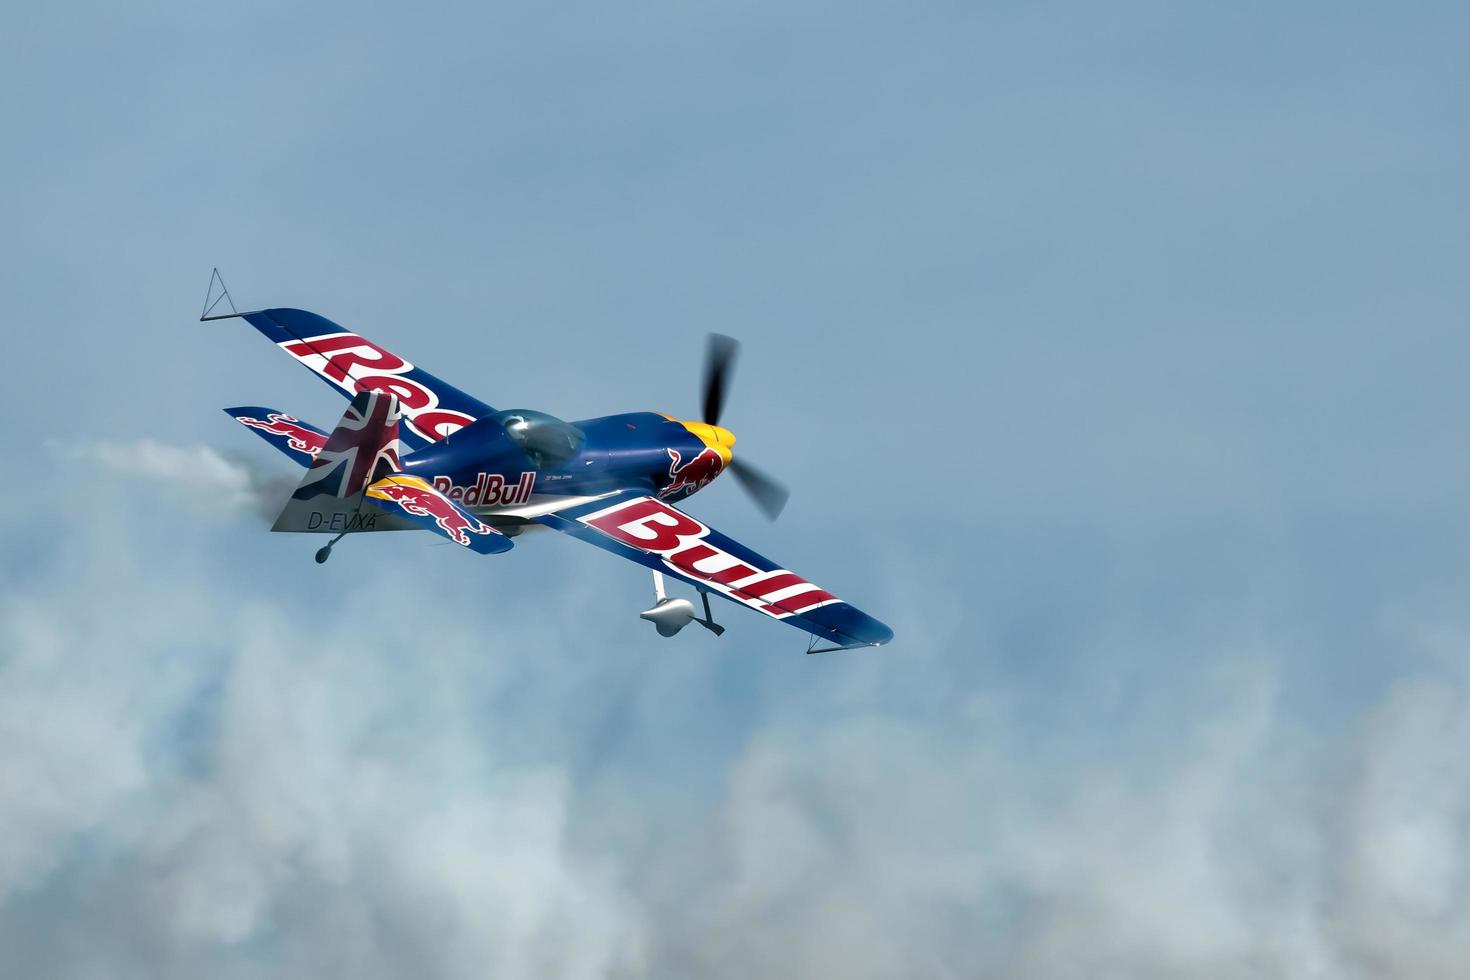 eastbourne, east sussex, 2012. red bull matador in airbourne foto